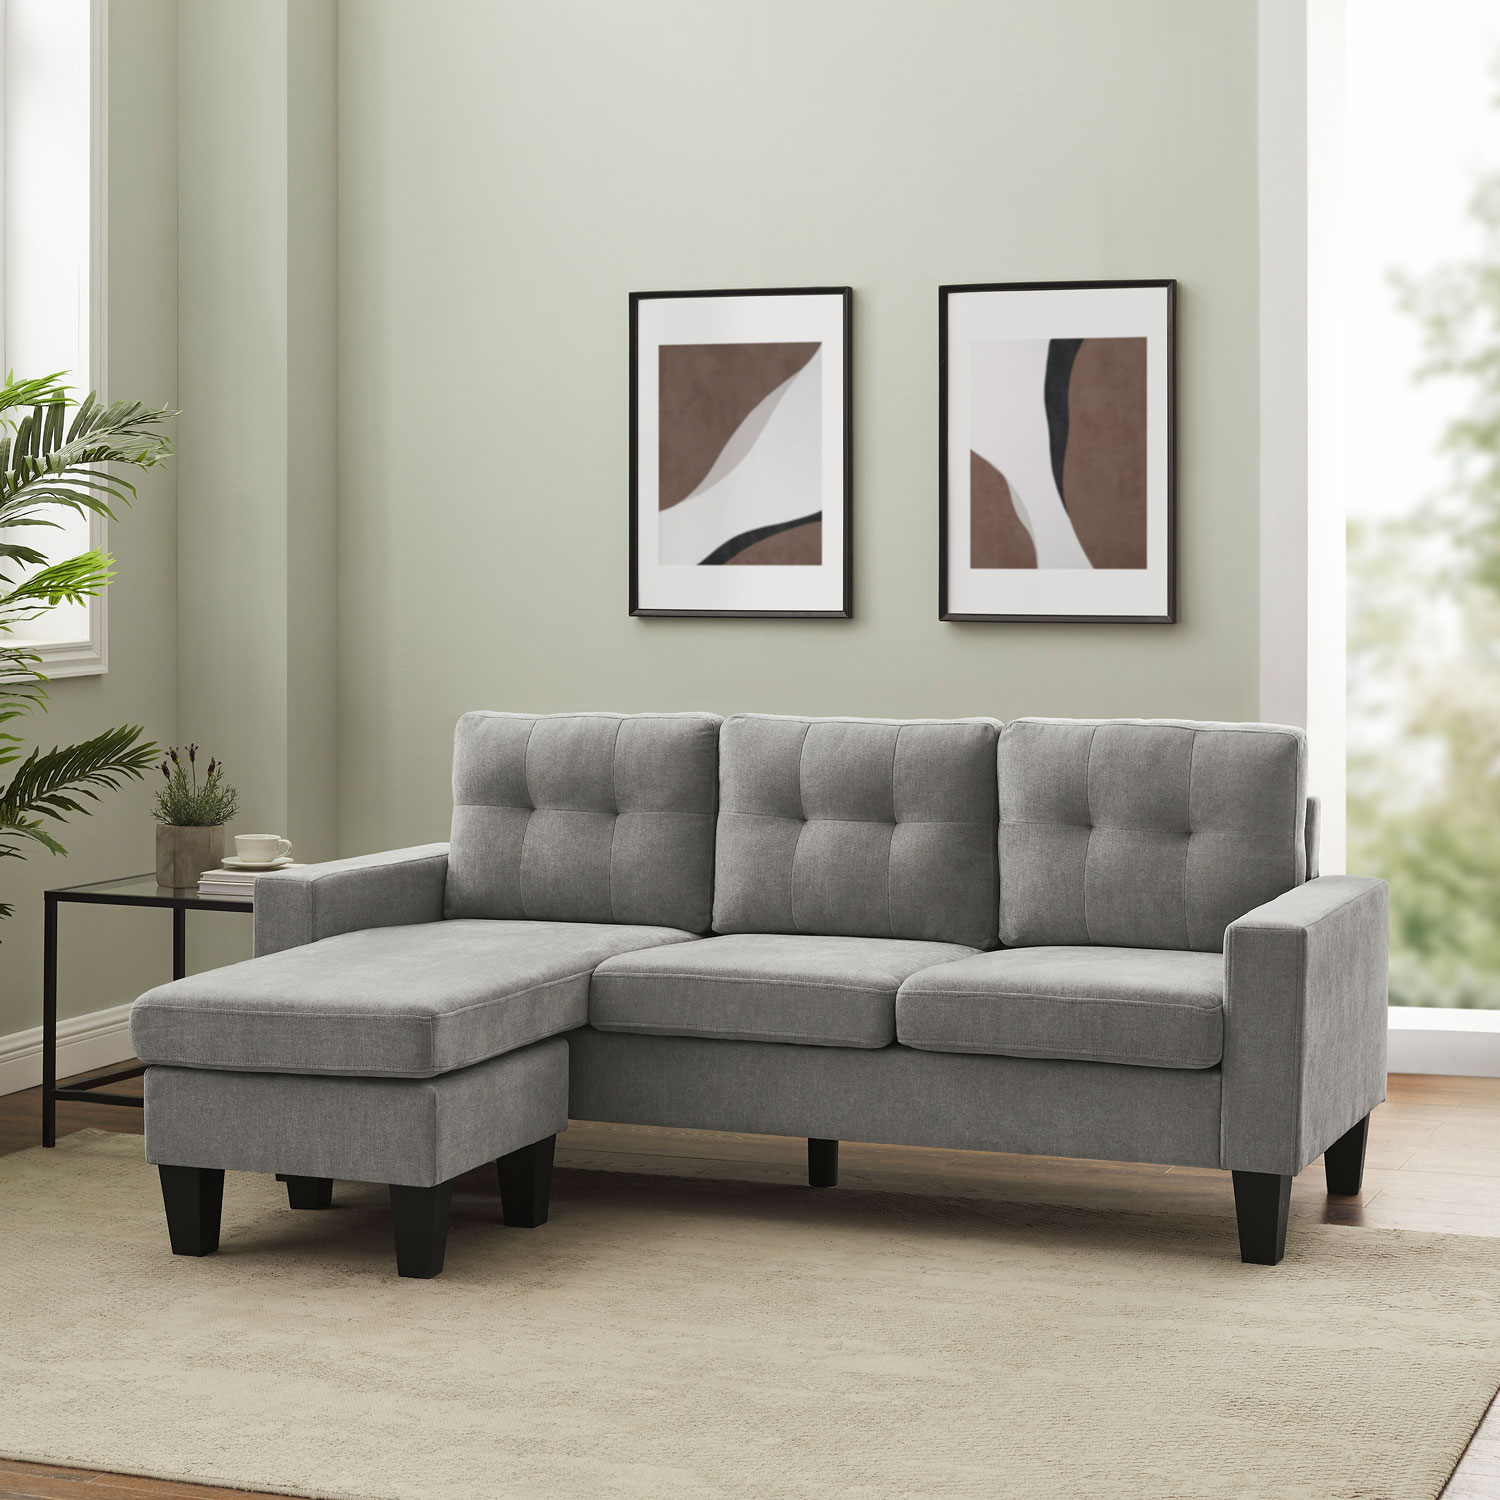 Althea Chaise Polyester Sectional Sofa - Light Grey